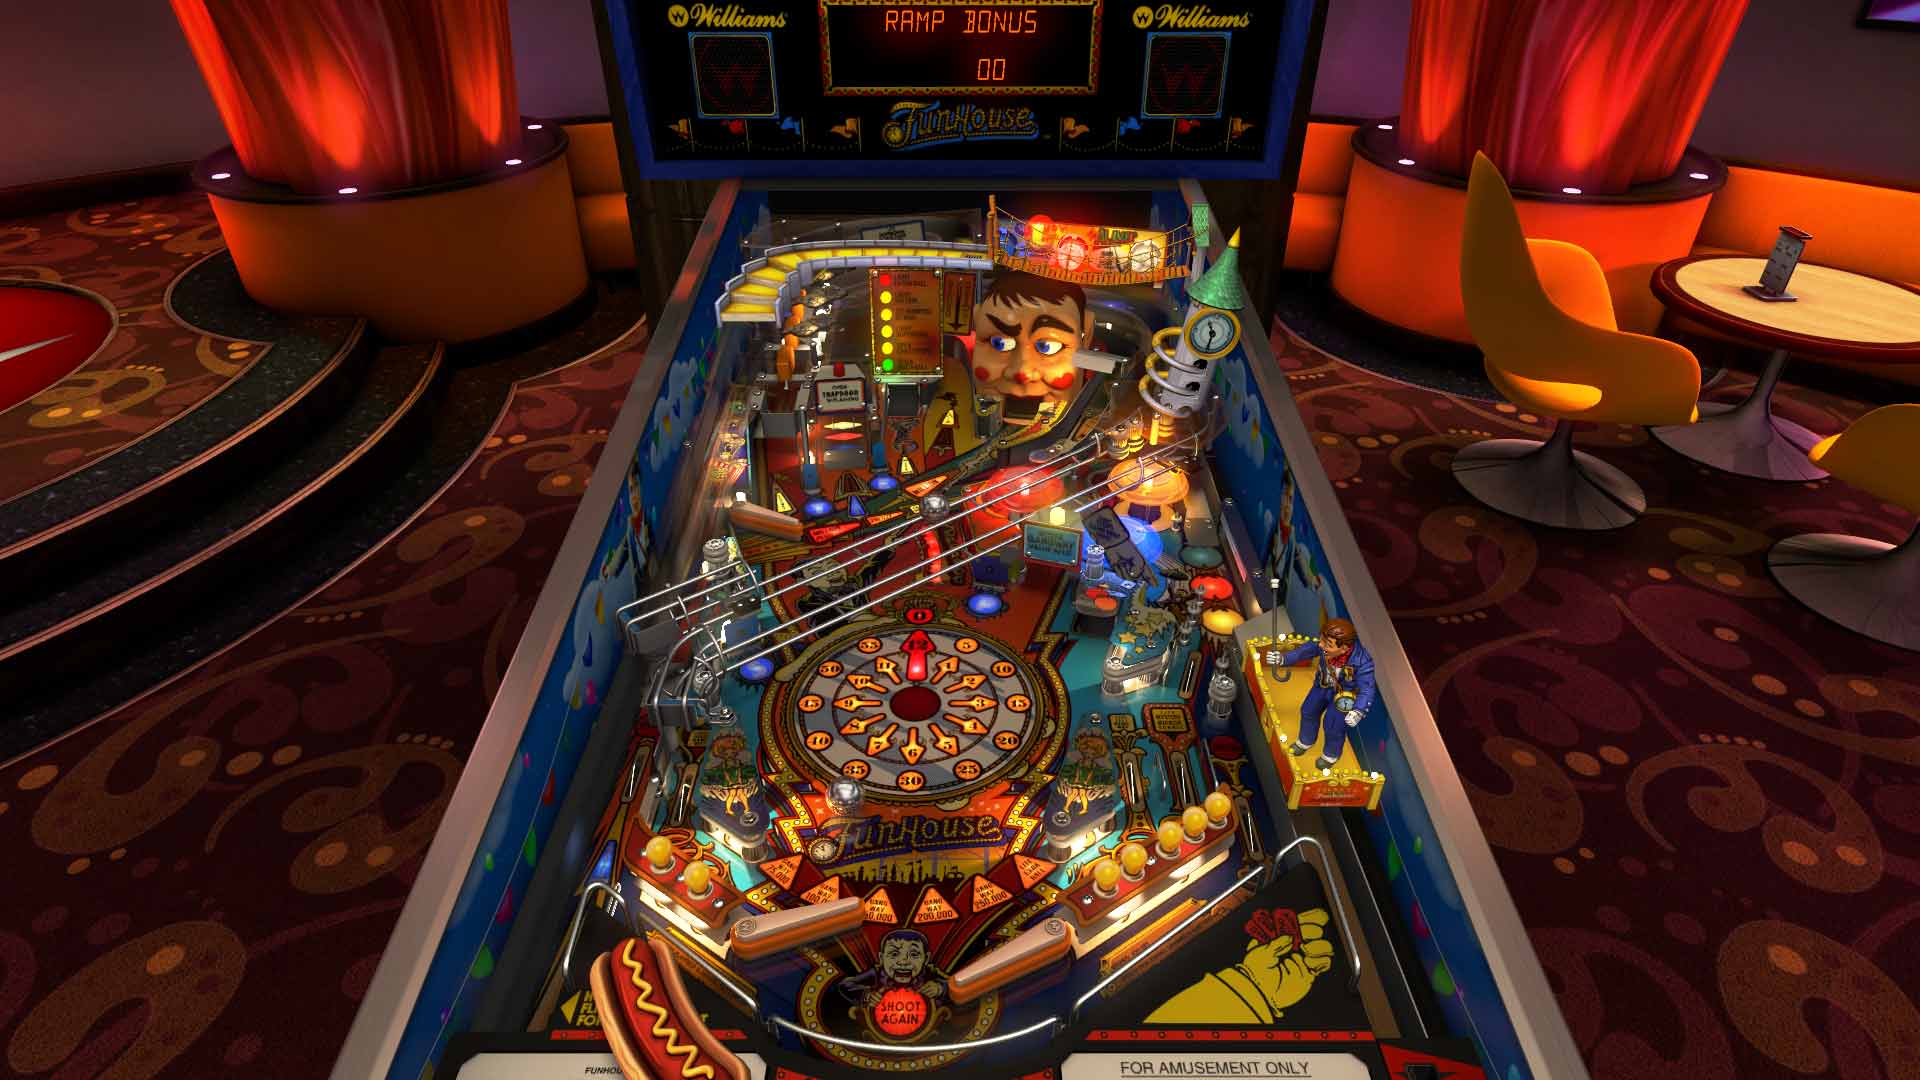 Funhouse table in Williams Pinball: Volume 6 for Pinball FX3